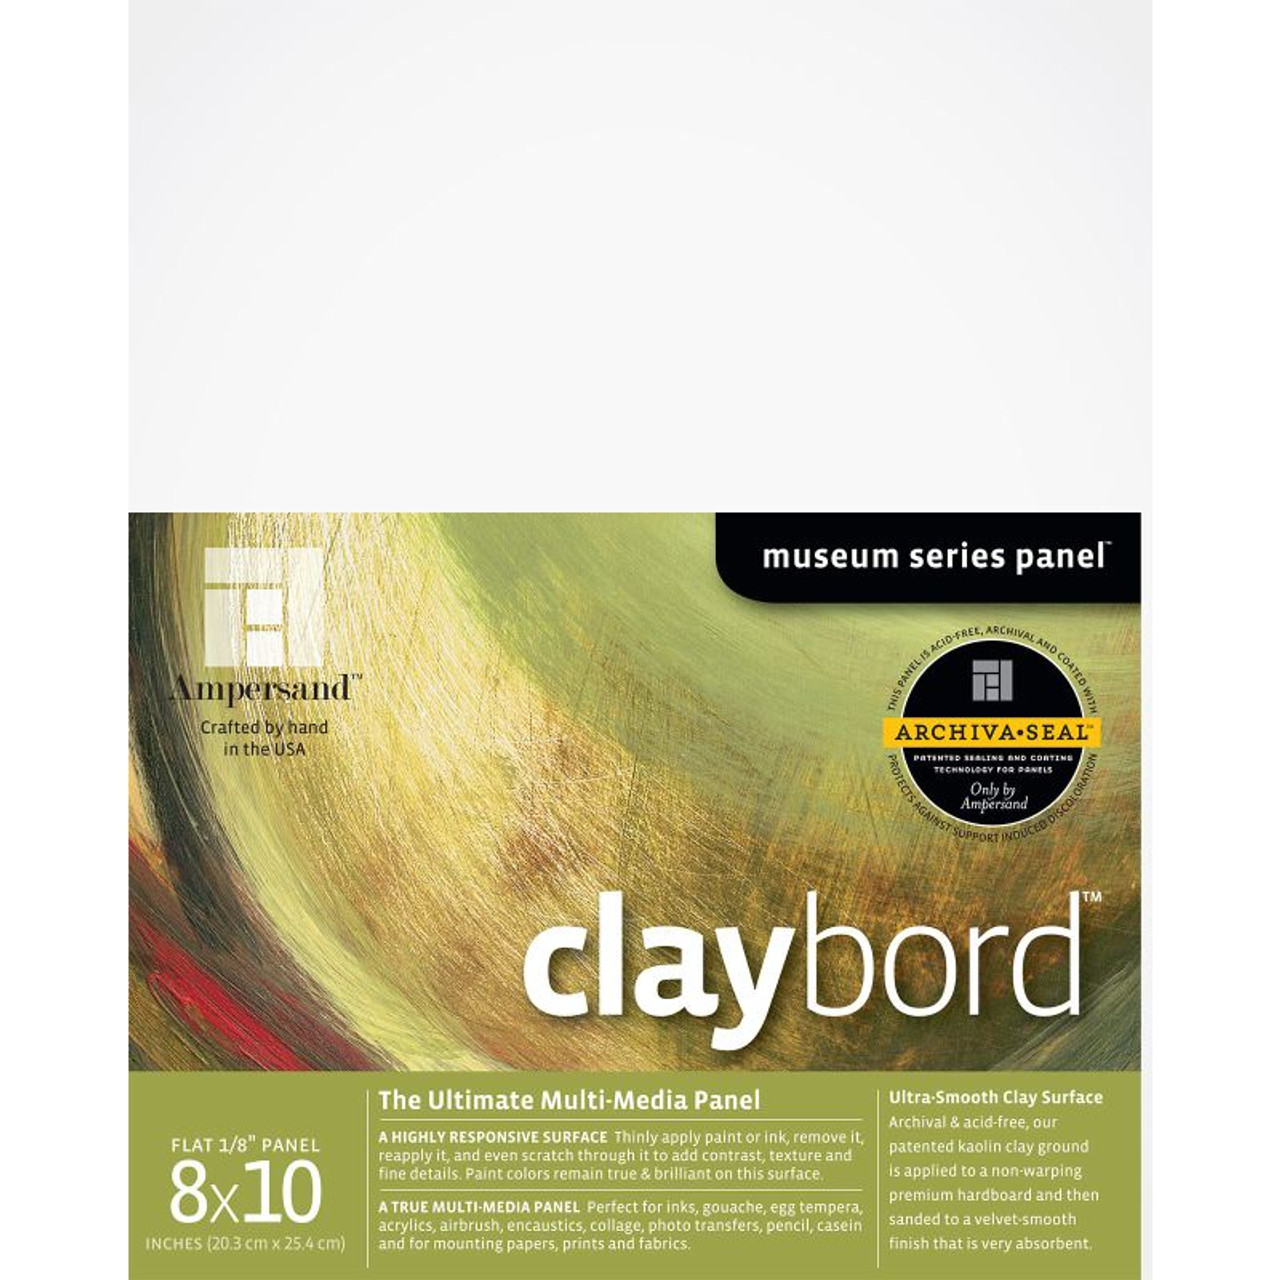 Ampersand Gesso Board 8x8 - Pack of 1